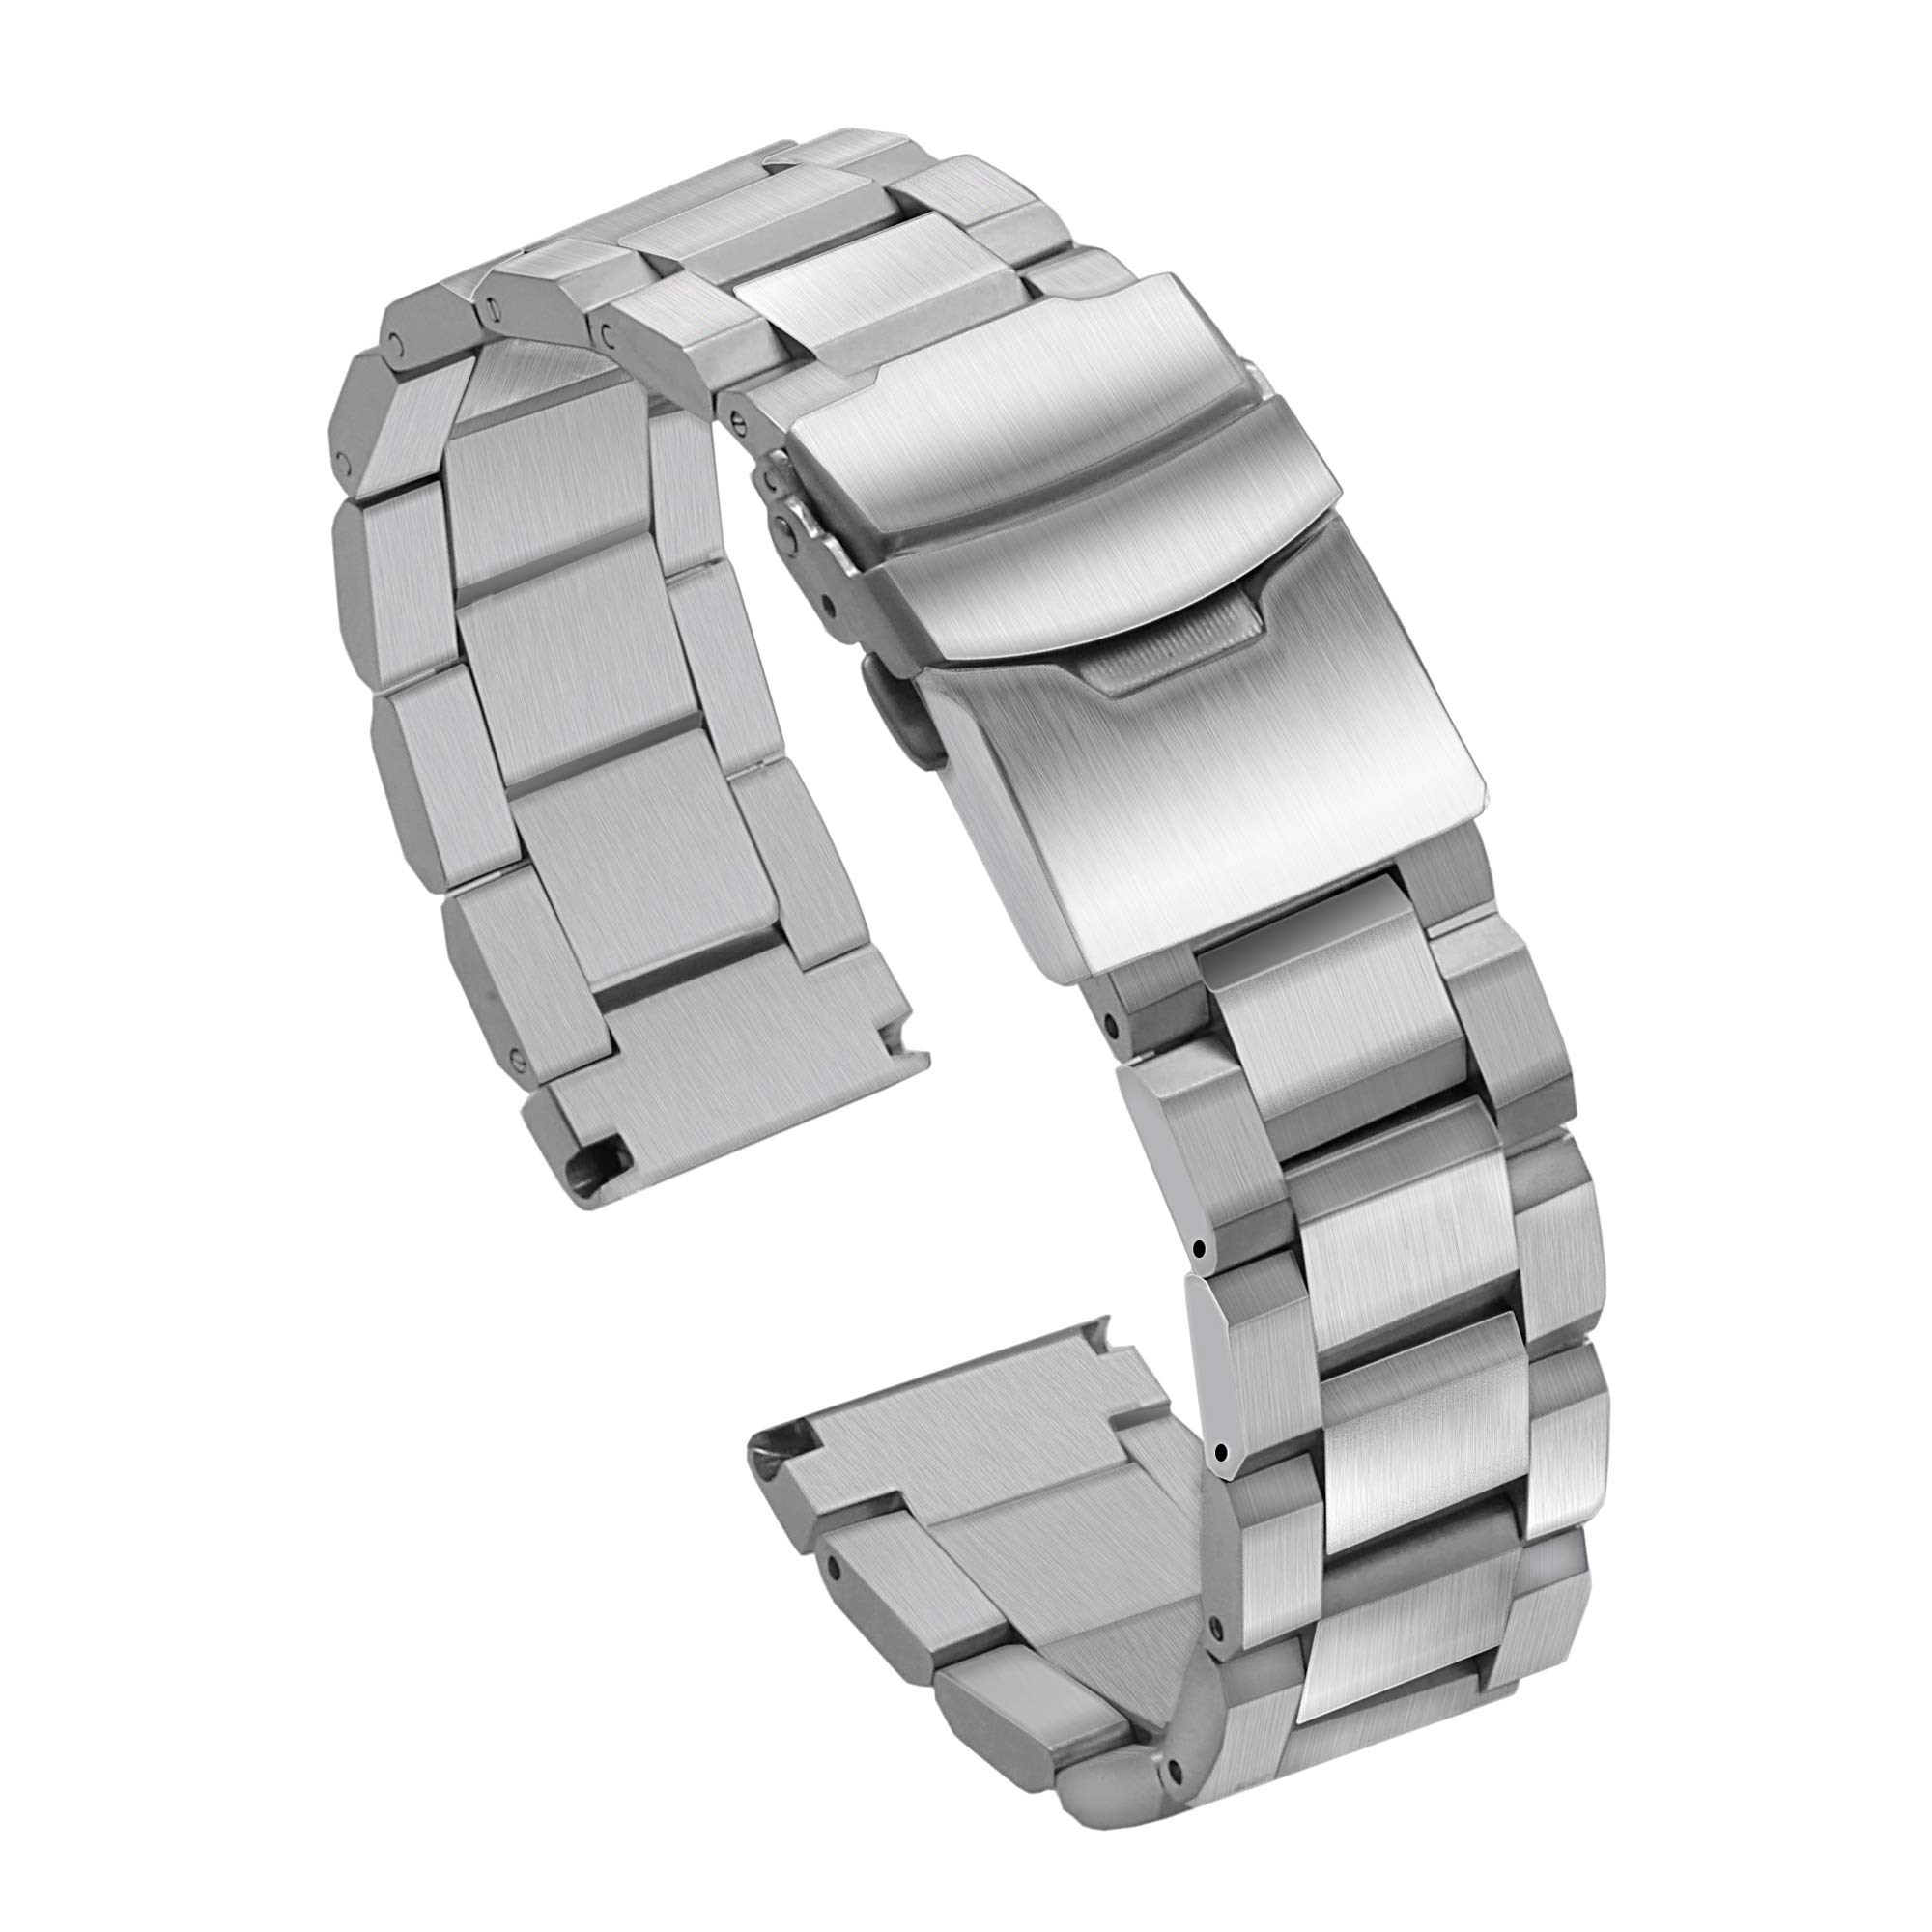 Hstrap Silver/Black Stainless Steel Watch Bands Brushed Finish Watch Strap 18mm/20mm/22mm/24mm Double Buckle Bracelet